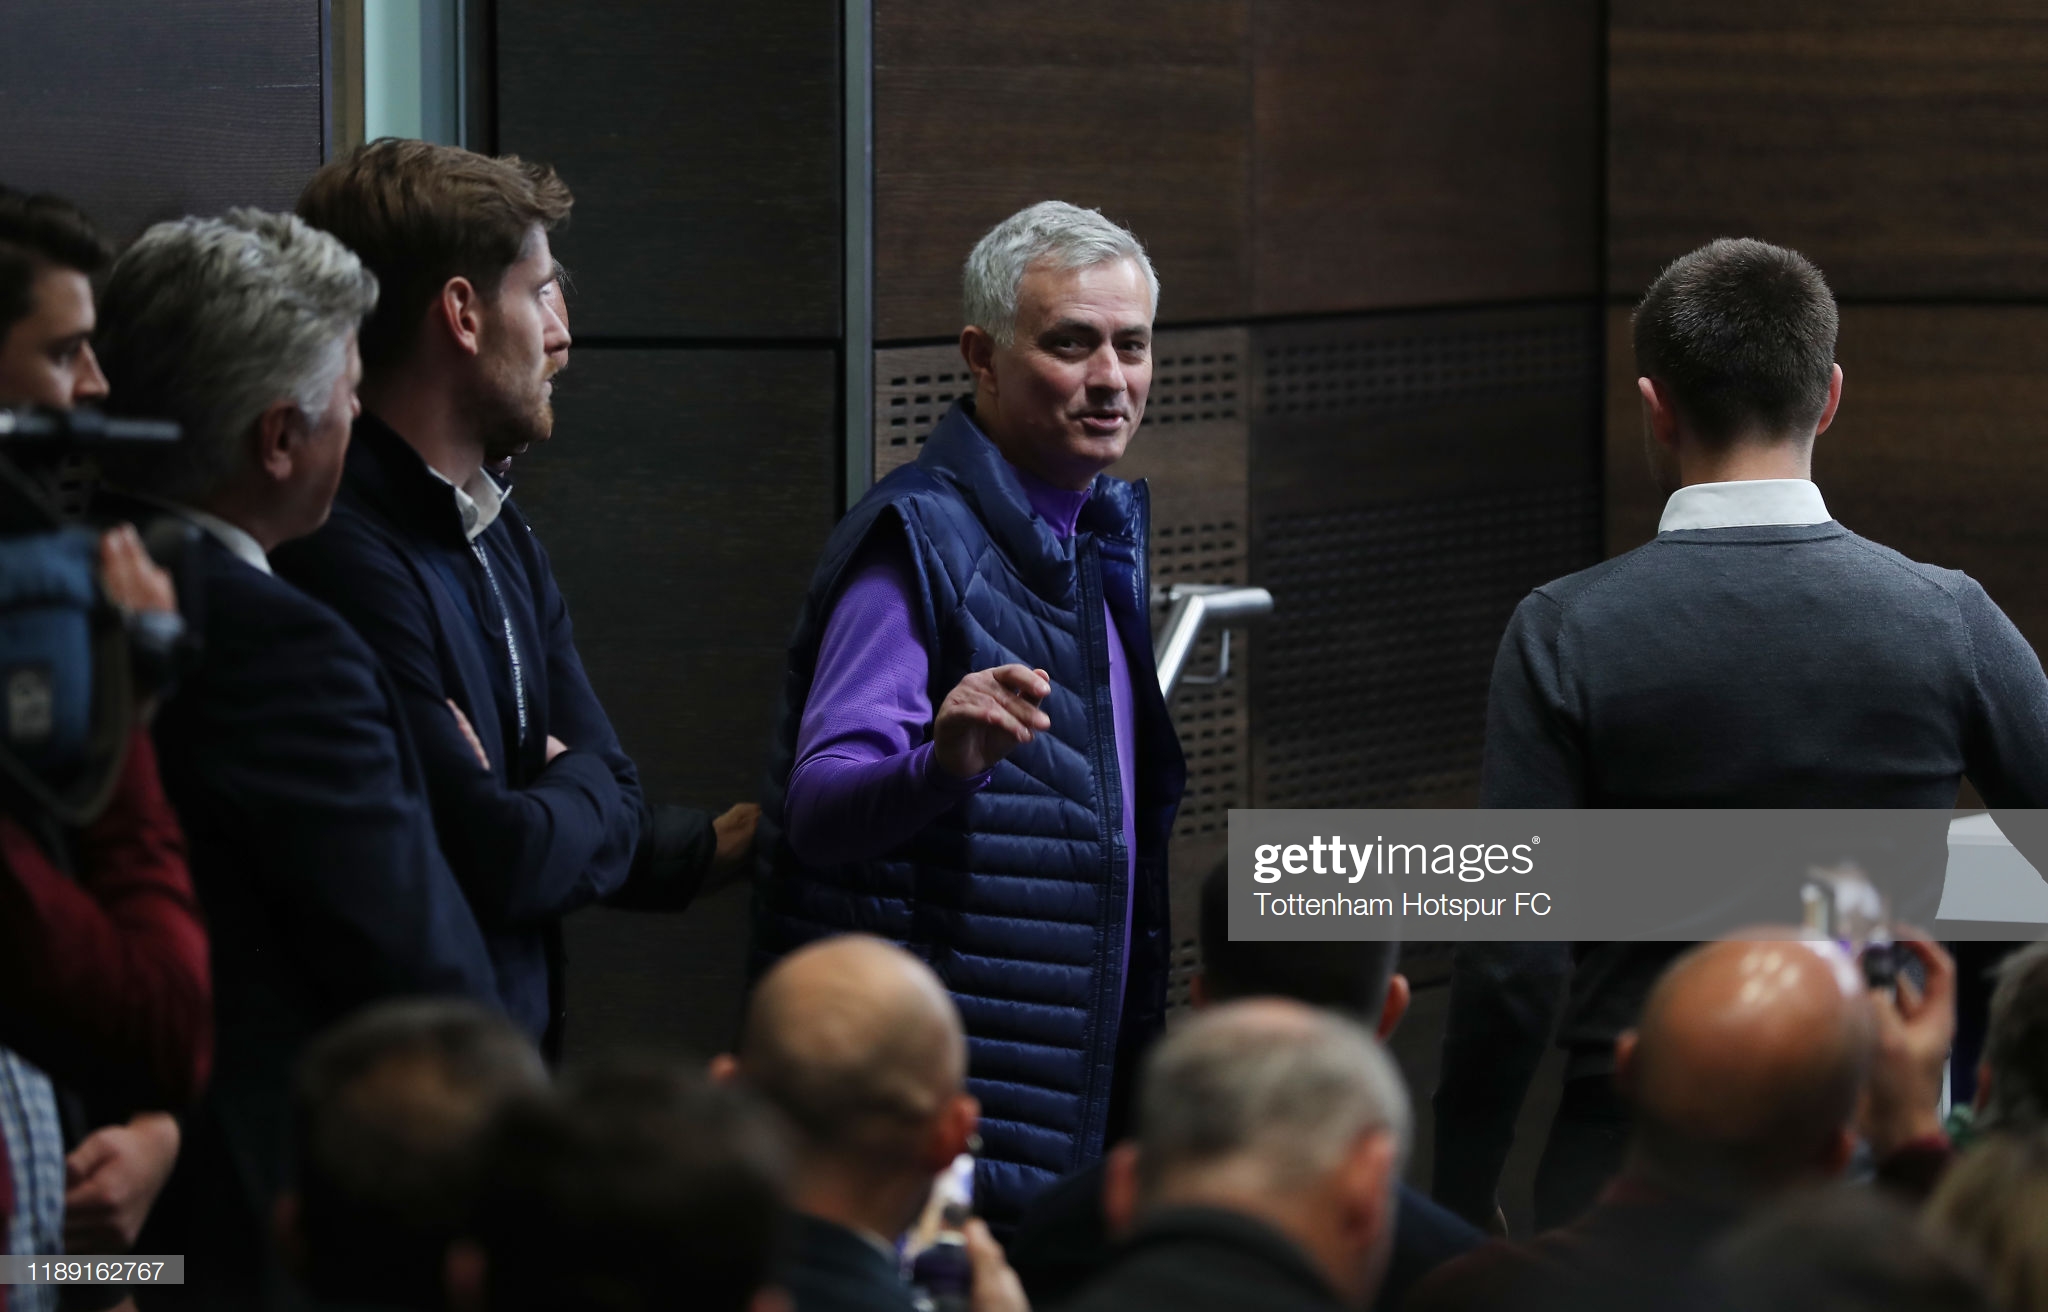 gettyimages-1189162767-2048x2048.jpg